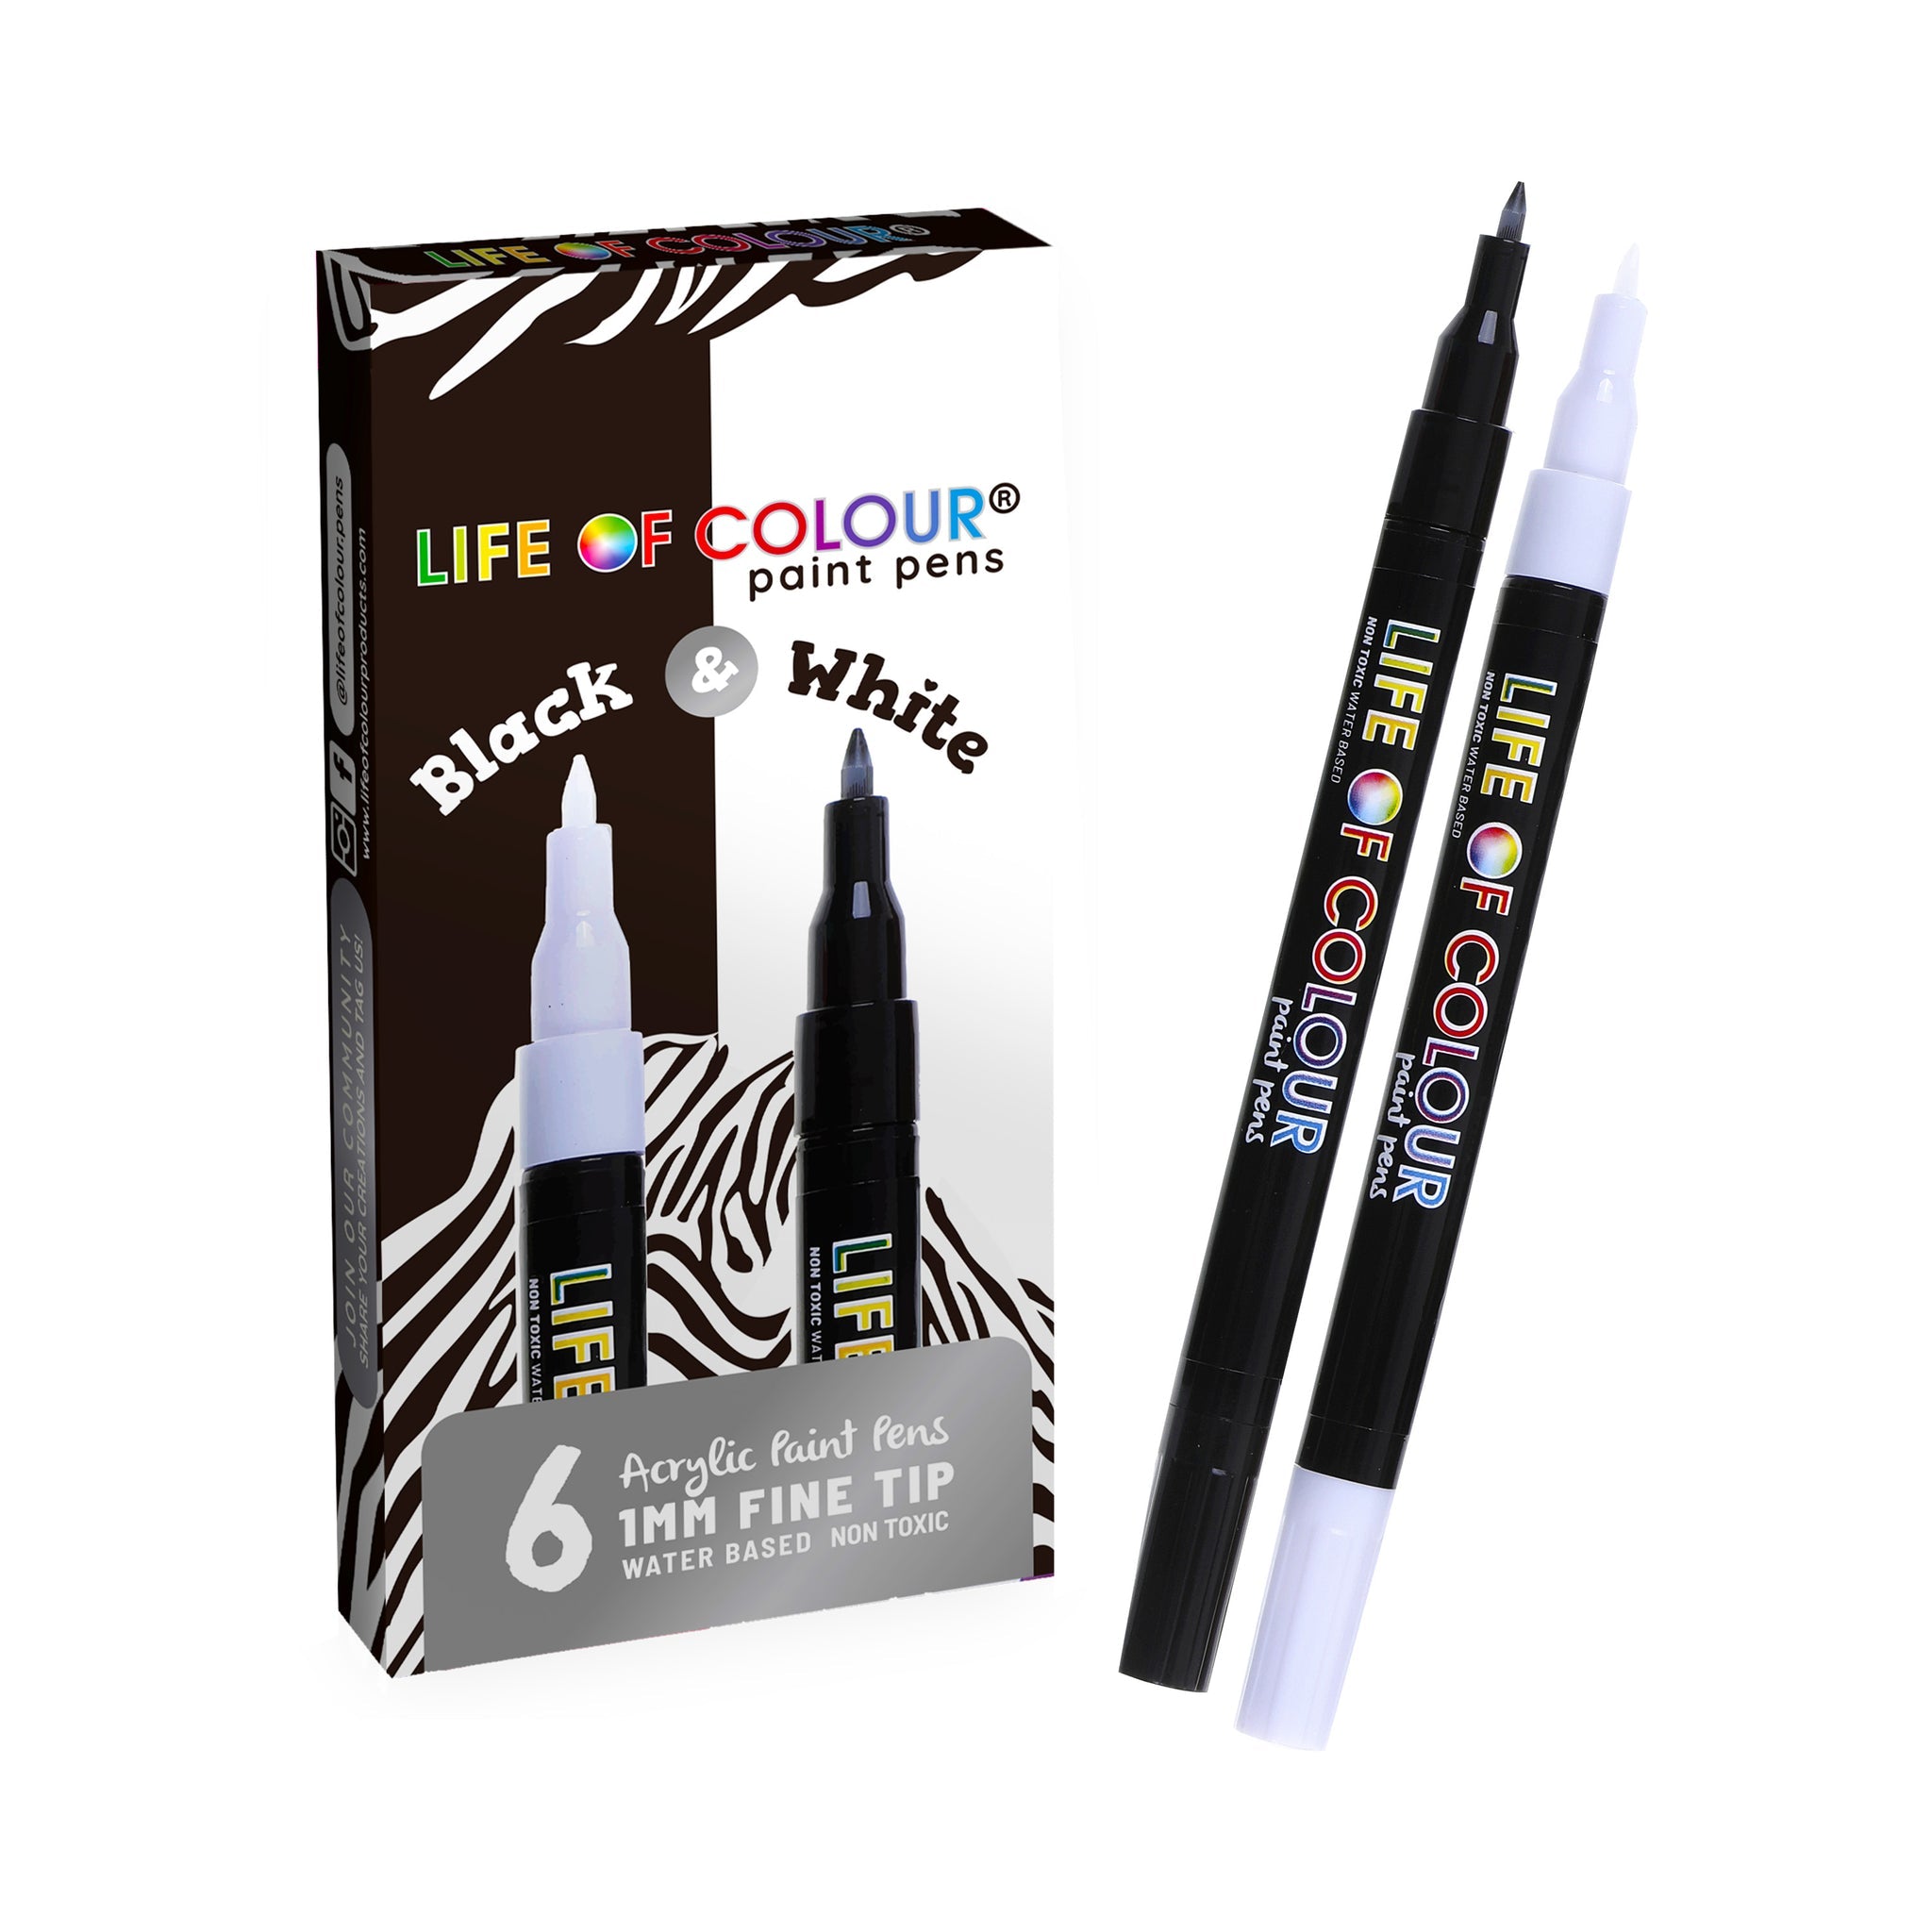 Life of Colour Paint Pens Black and White 1mm fine tip